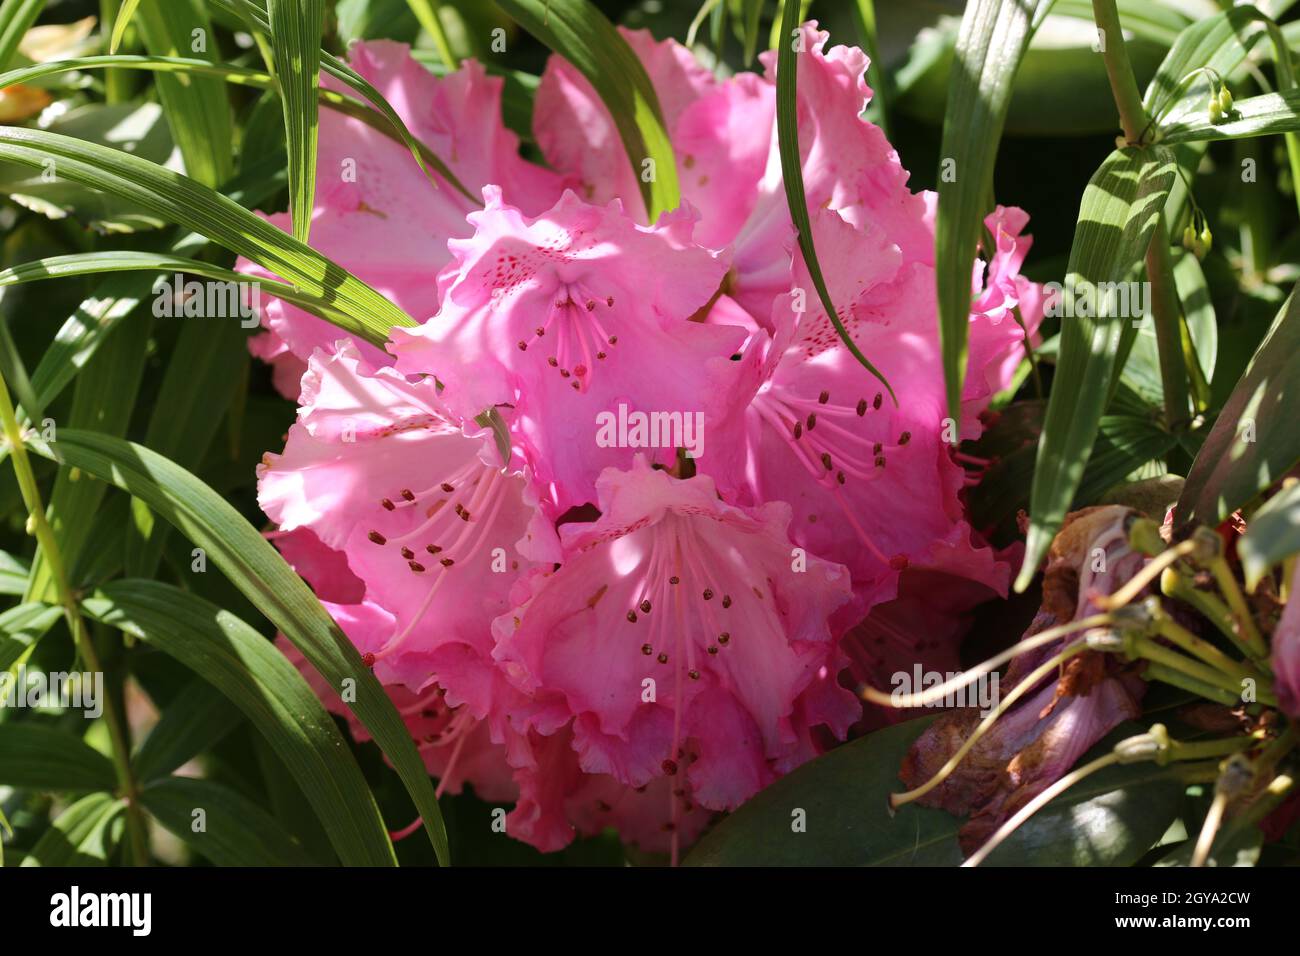 Pink Rhododendron hybrid variety Germania, flowers with dark pink spots on the petals and a dark blurred background of leaves. Stock Photo